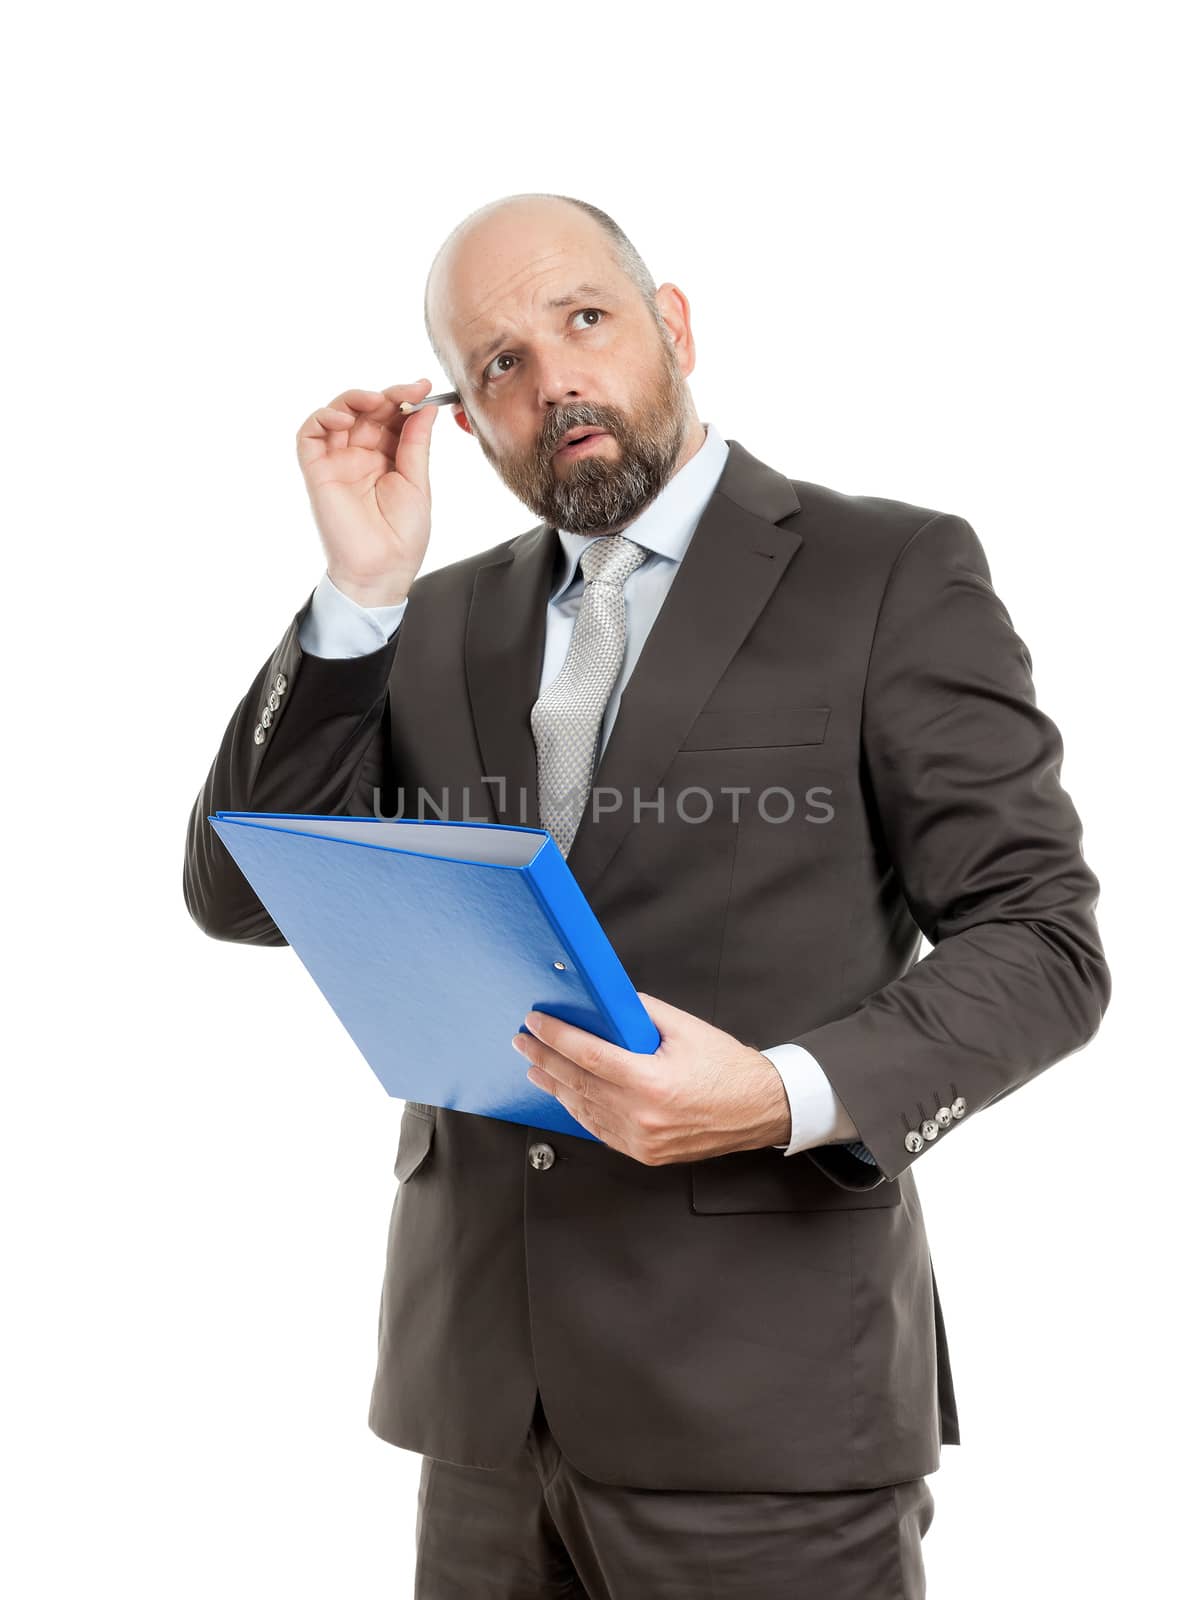 An image of a handsome business man with a blue folder